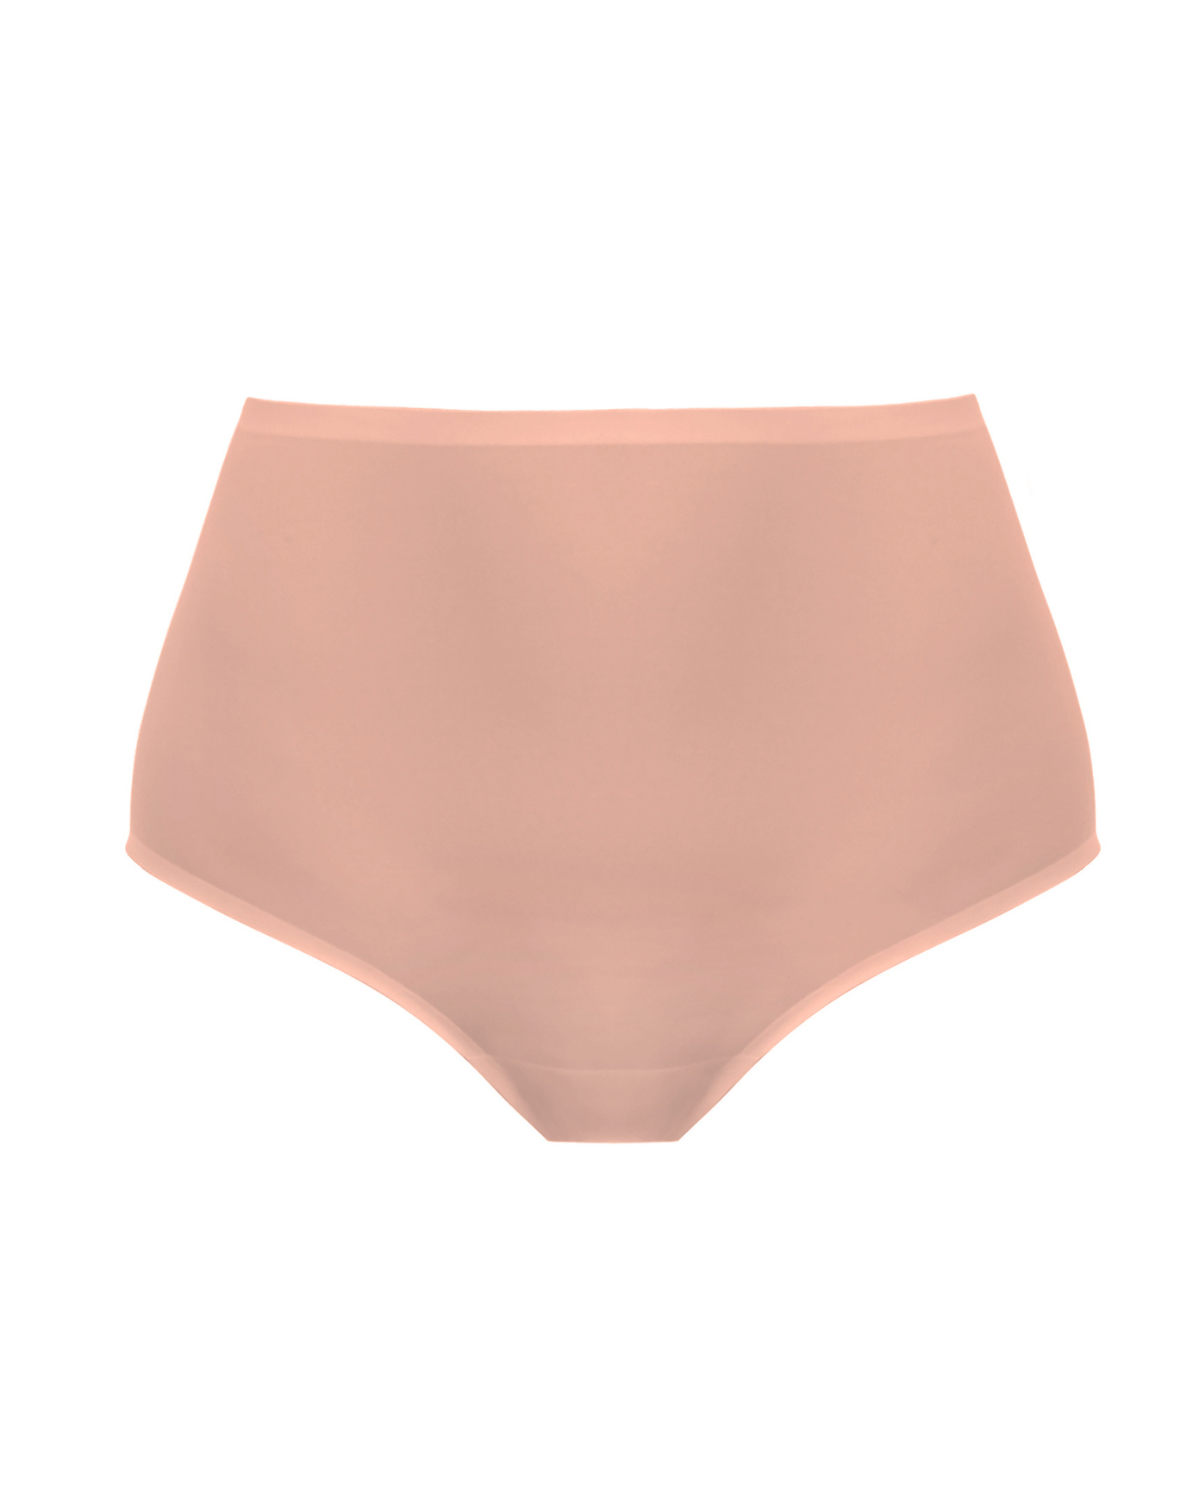 Flat lay of a seamless stretch full brief in natural beige